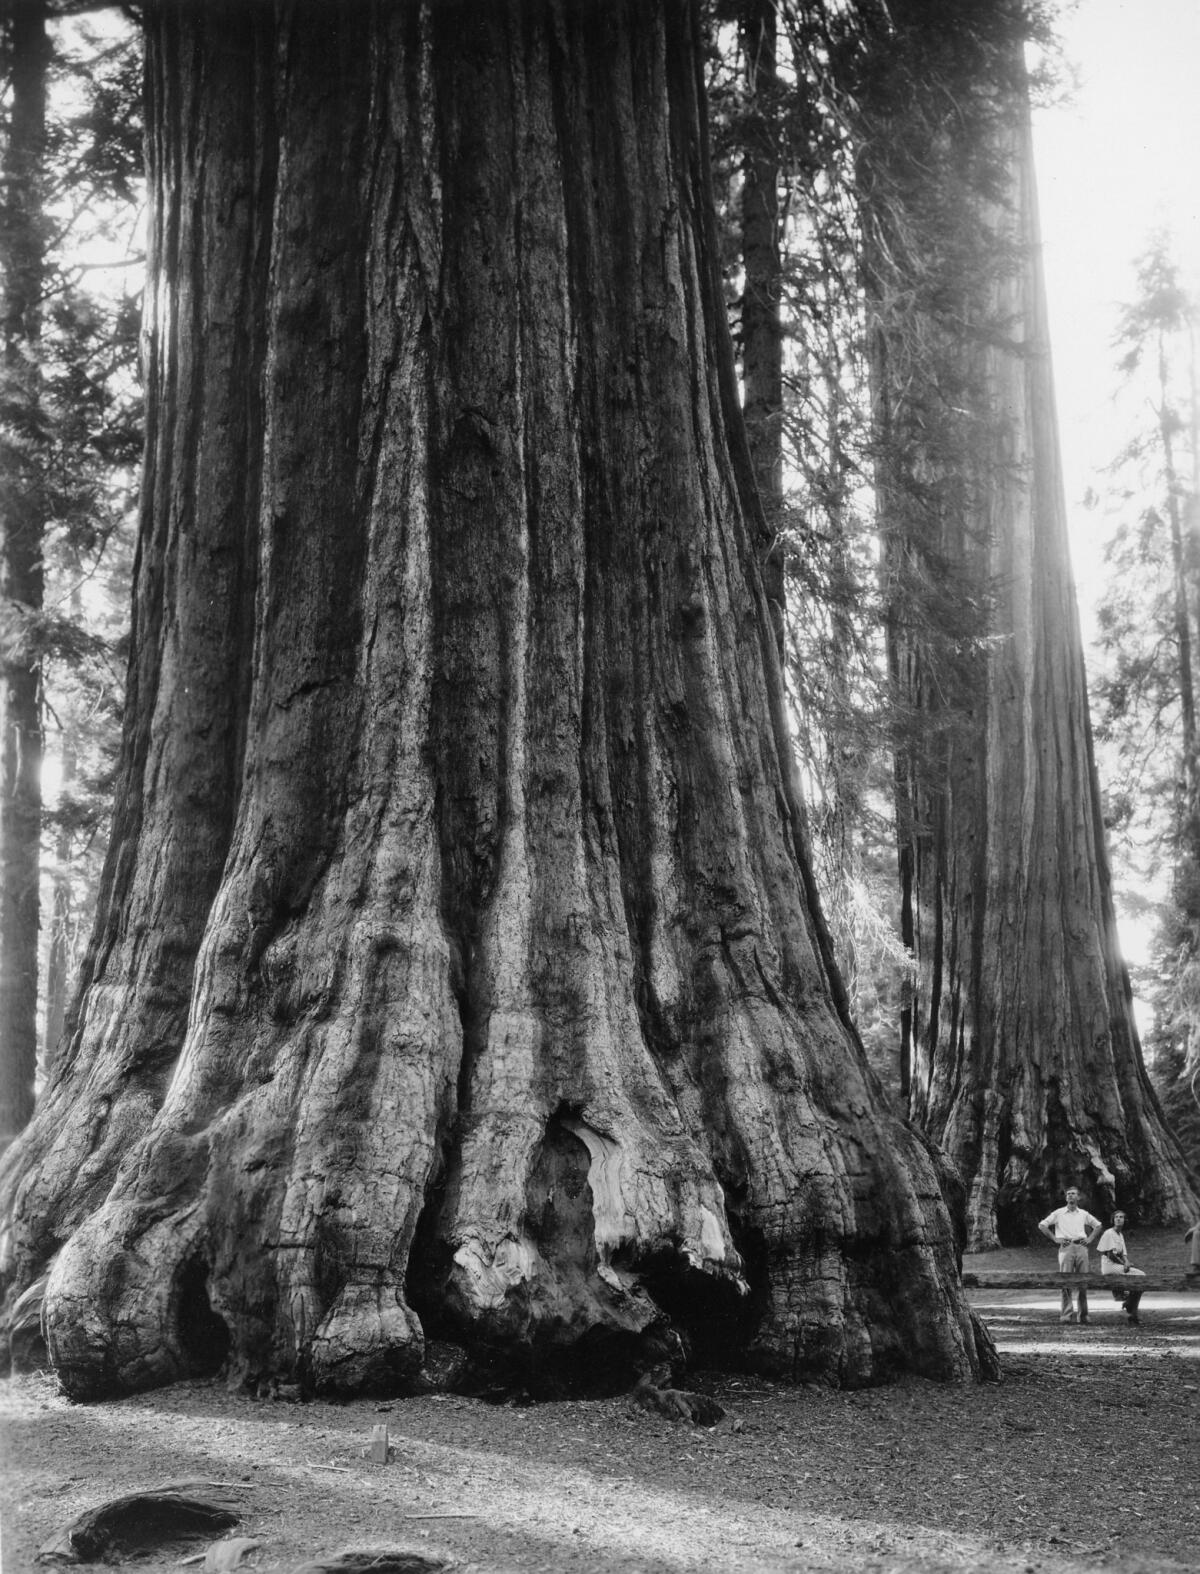 A sequoia tree in the former Grant National Park, which neighbored Sequoia. The park was absorbed by Kings Canyon National Park when it was established in 1940. (Los Angeles Times Library)